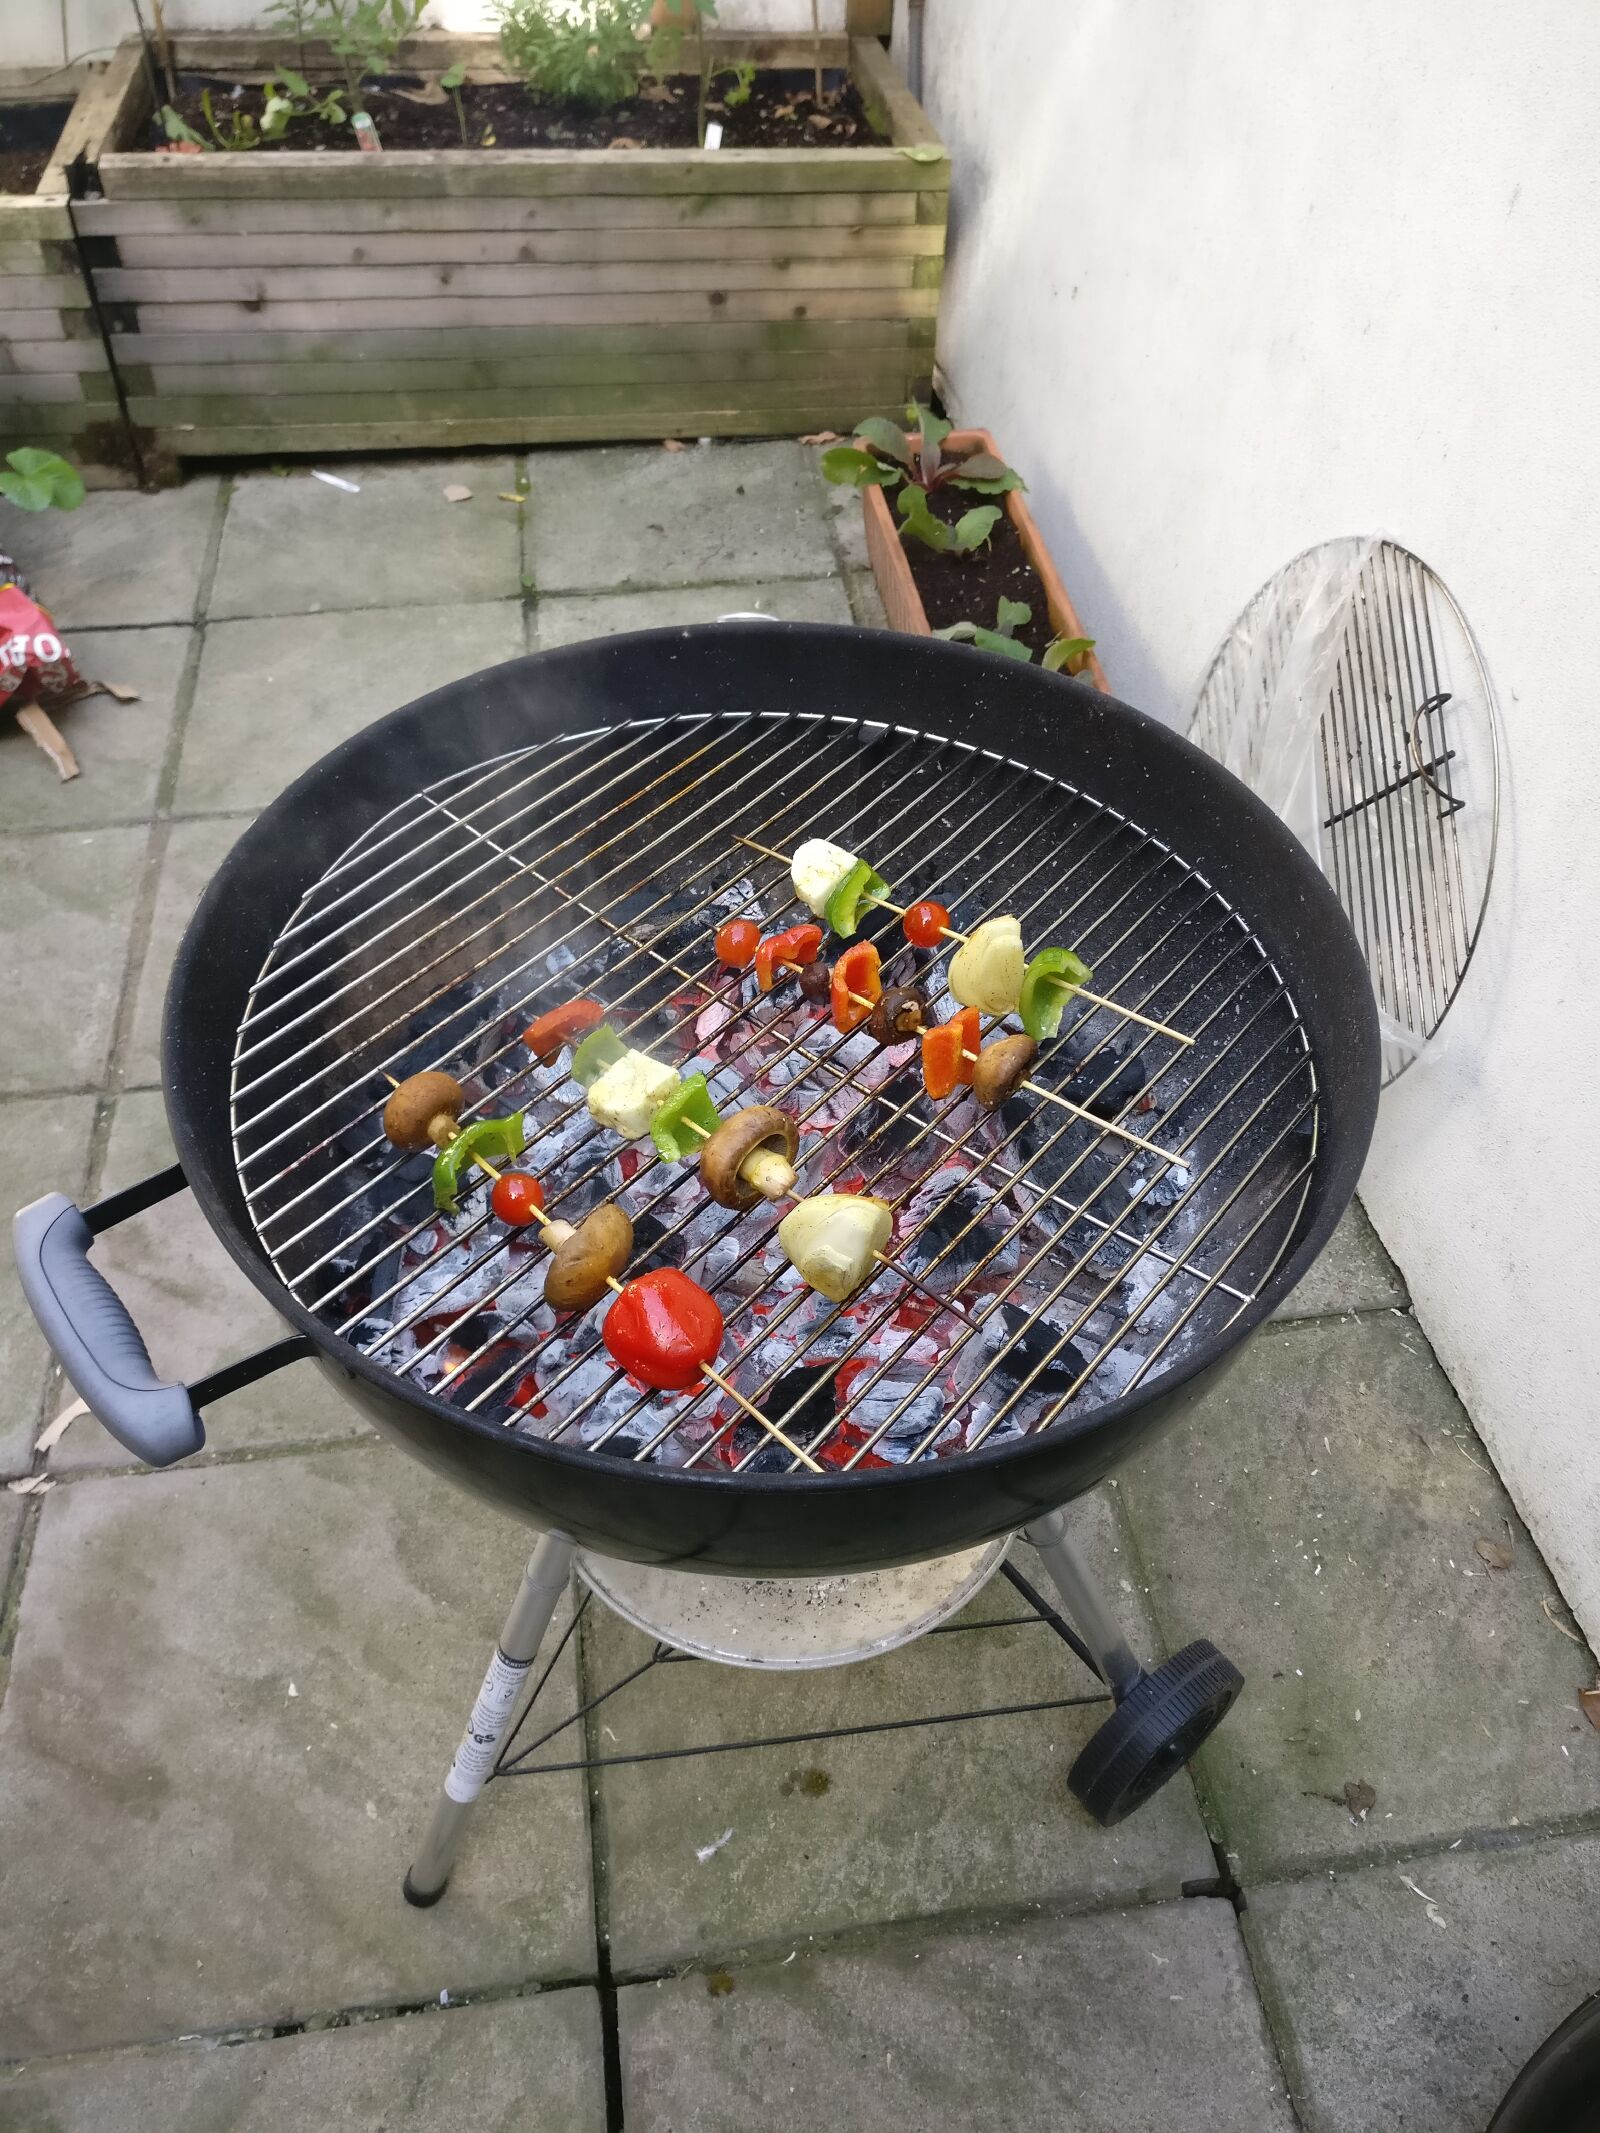 OnePlus A3003 sample photo. Barbecue, grill, vegetarian photography